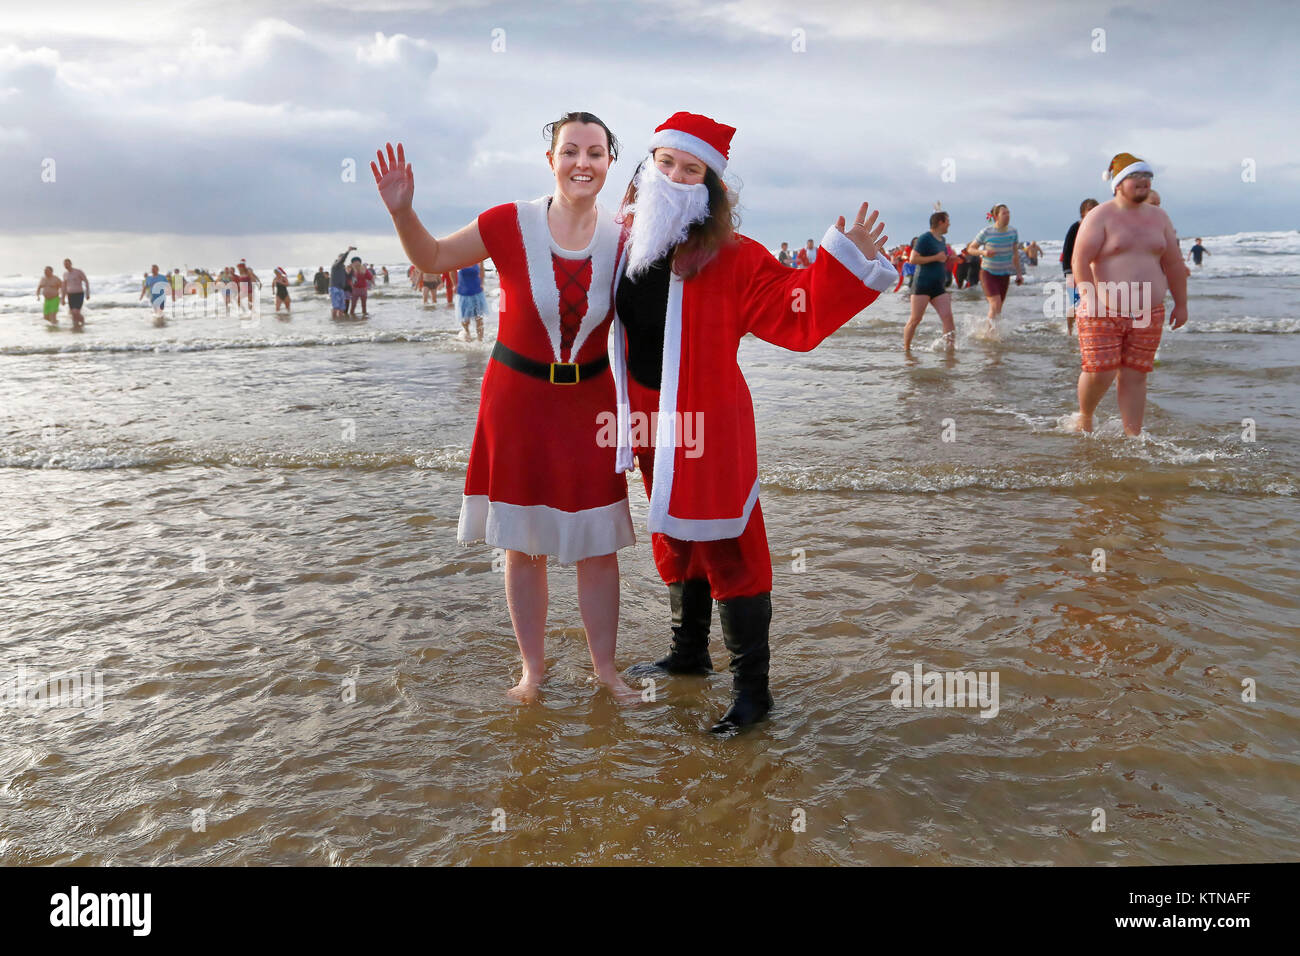 Two women dressed as Santa splash about in the water Stock Photo